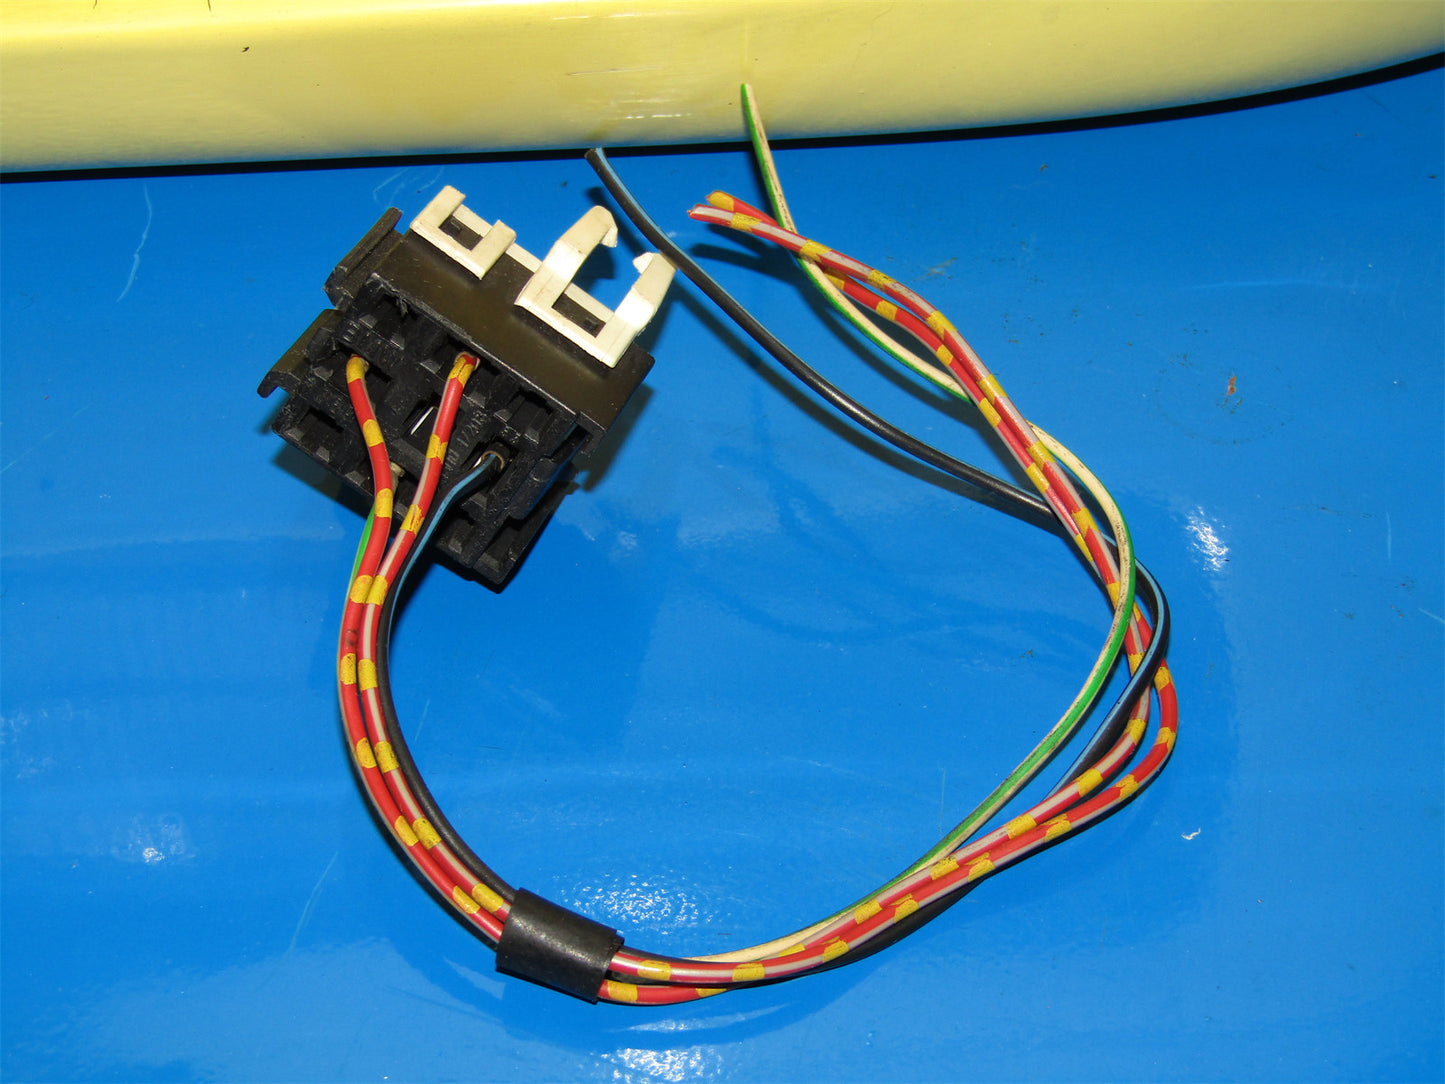 92-95 BMW 325i OEM V23134-K59-X222 Relay Pigtail Harness Connector